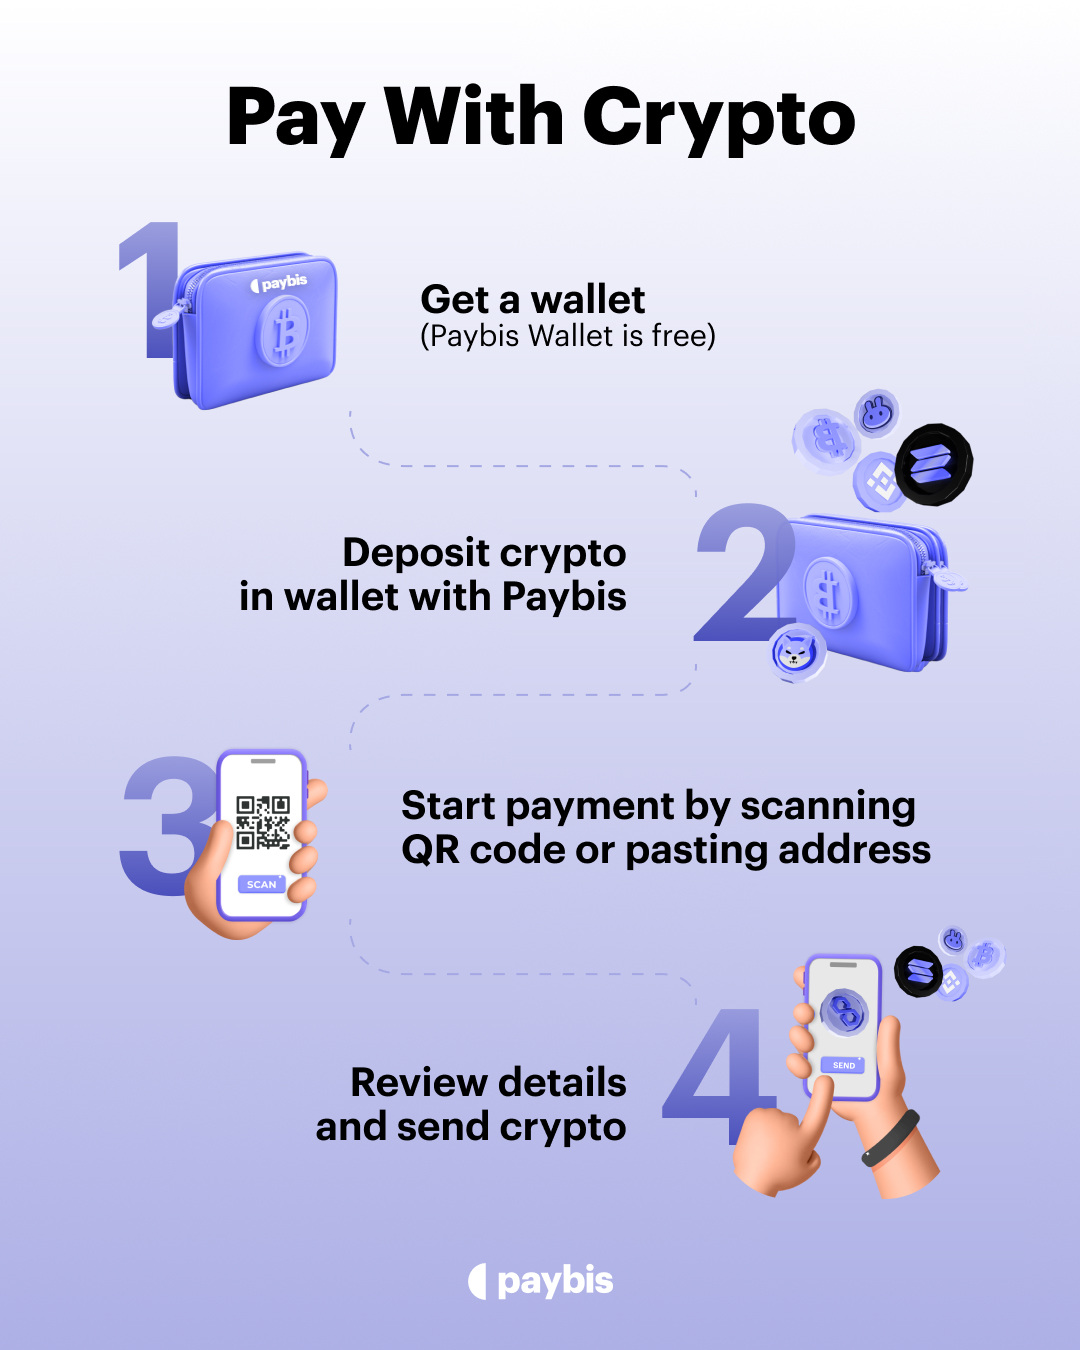 How To Pay With Bitcoin?